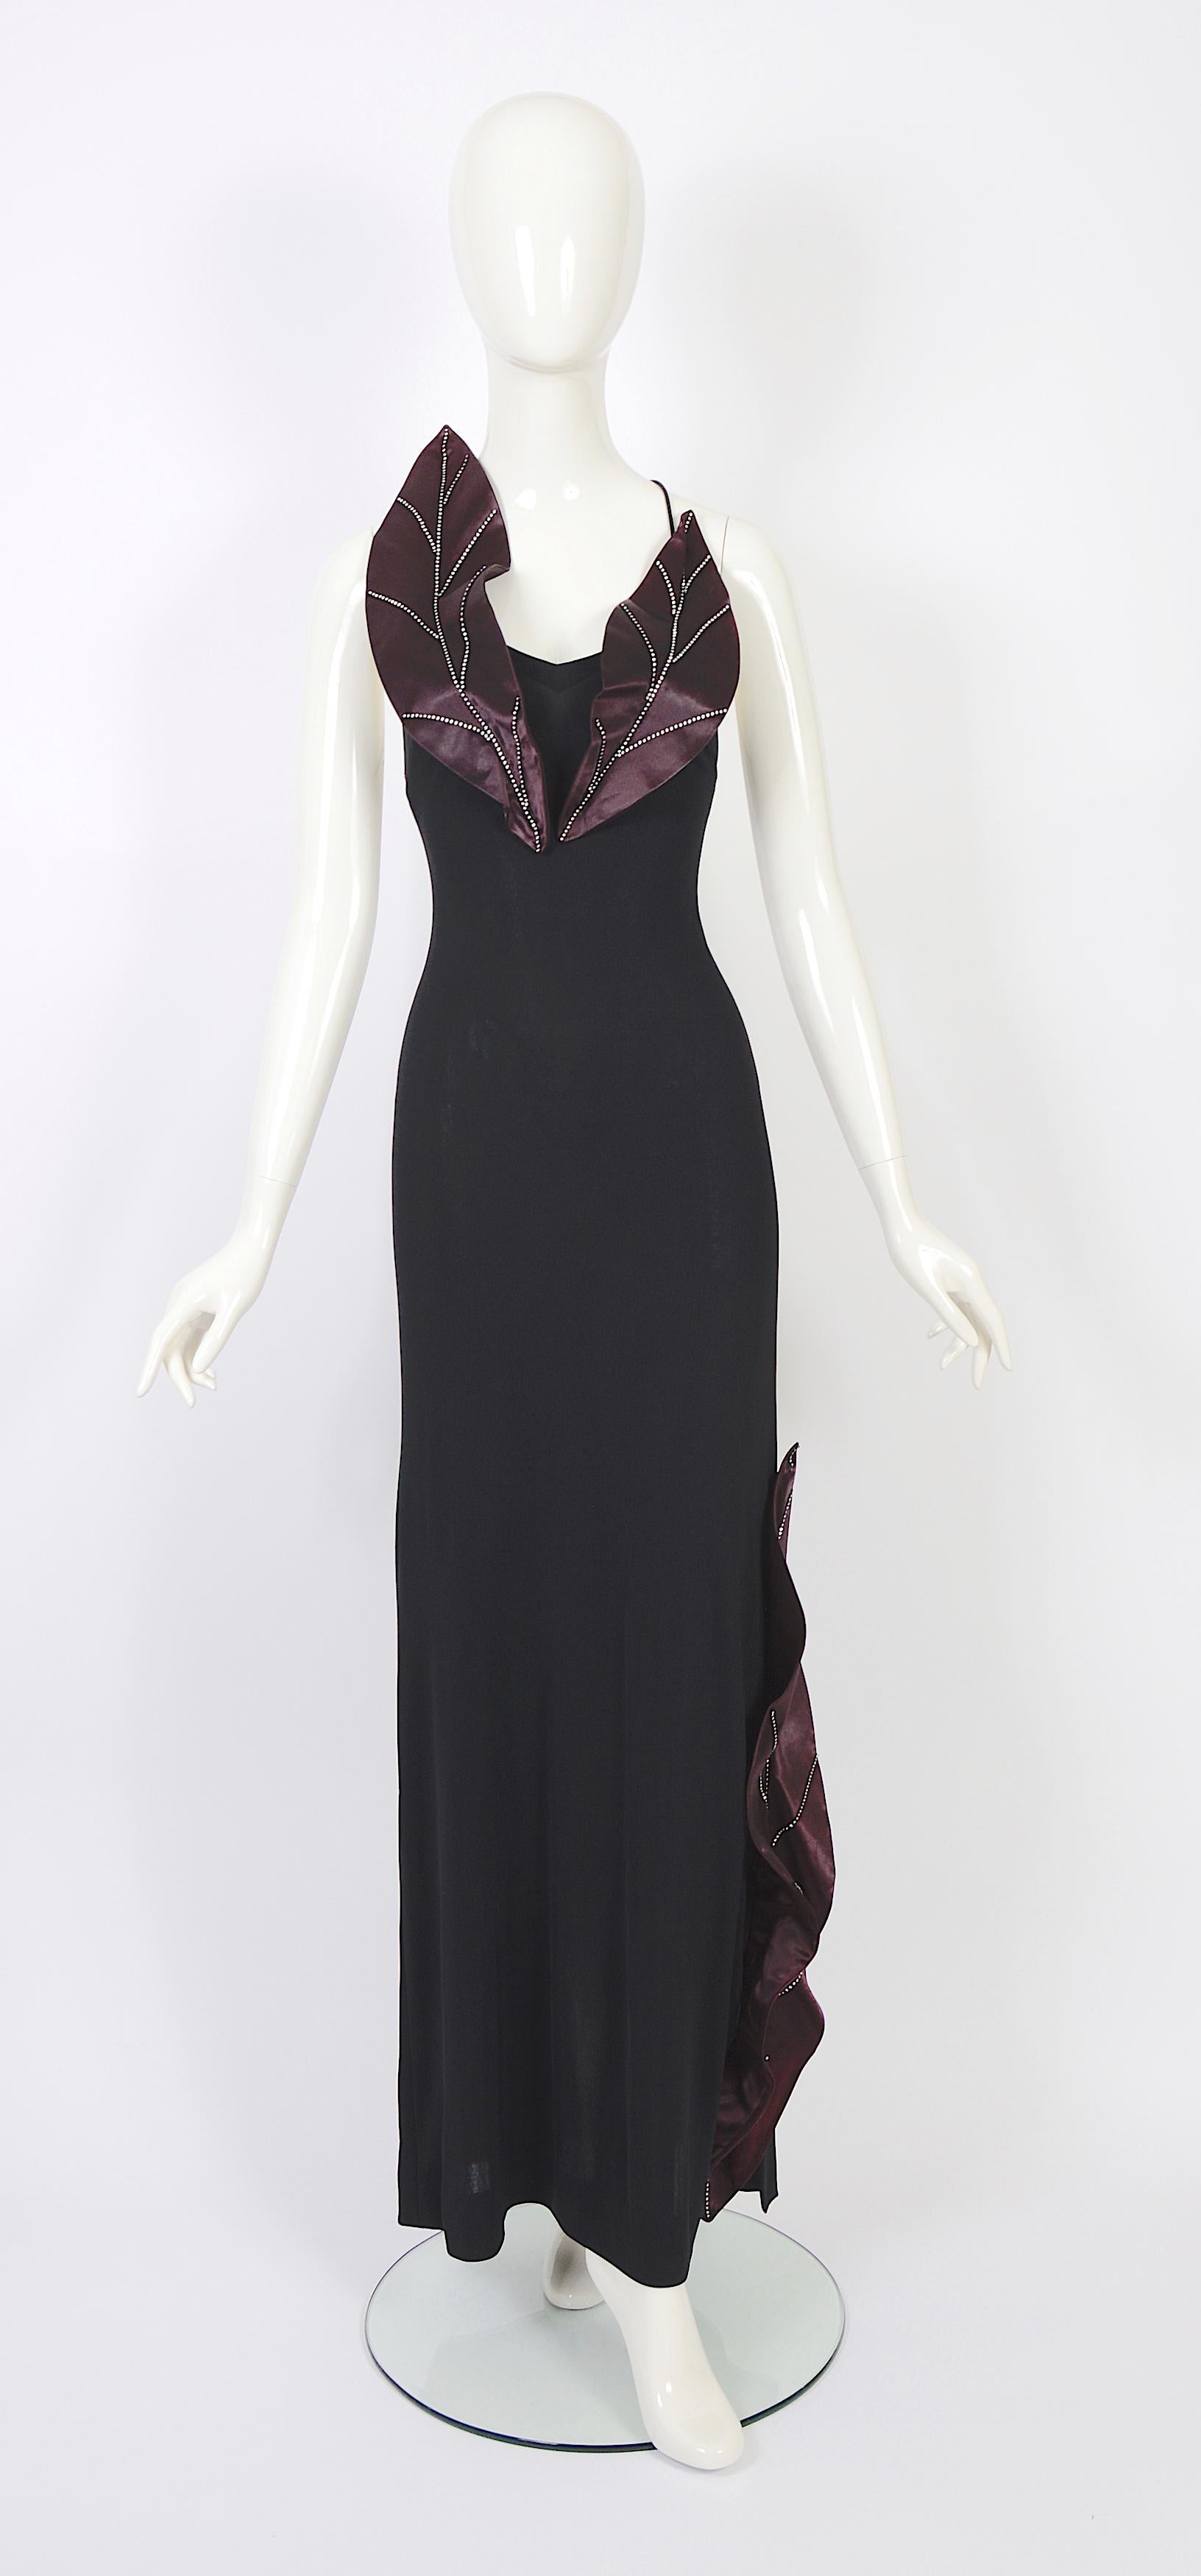 Verlaine Vintage is thrilled to present an exquisite 1970s open-back vintage dress by Loris Azzaro.
Crafted from a luxuriously soft black silk and viscose mix jersey fabric, this dress features attached embellished satin & diamante leaves that add a